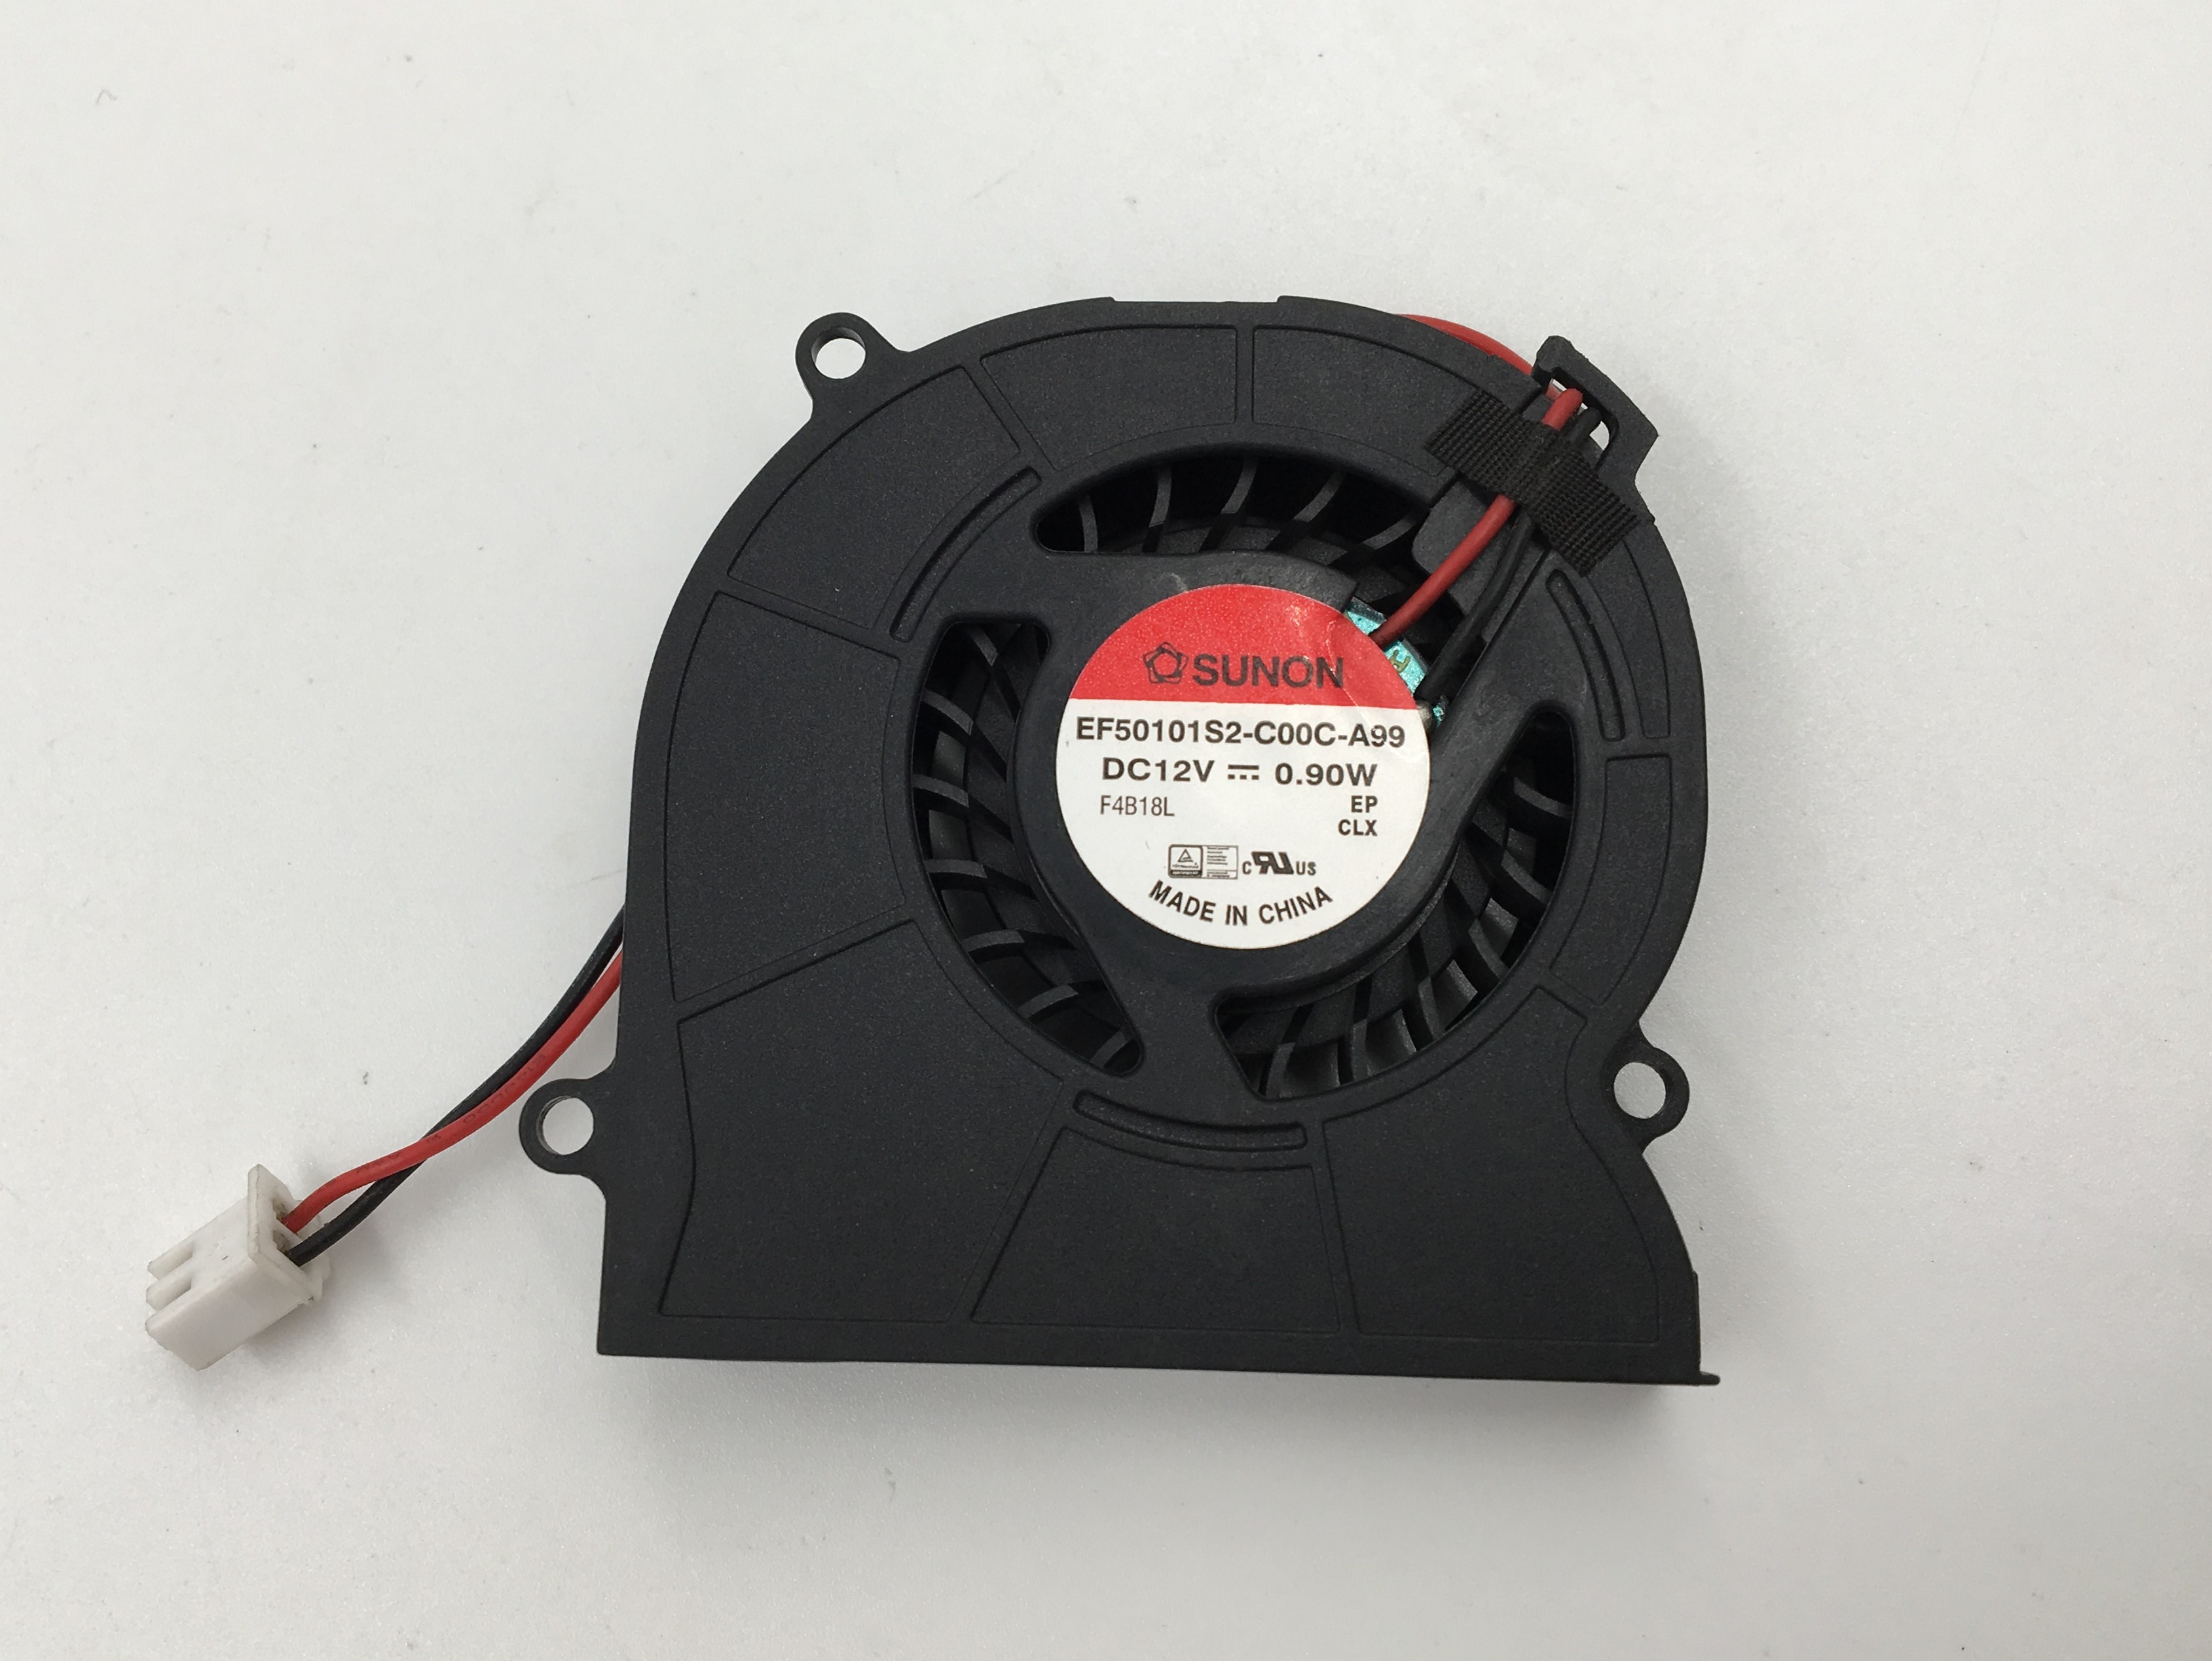 SUNON EE50101S2-C00C-A99 DC12V 0.9W 2Pin 2Wire Cooling Fan